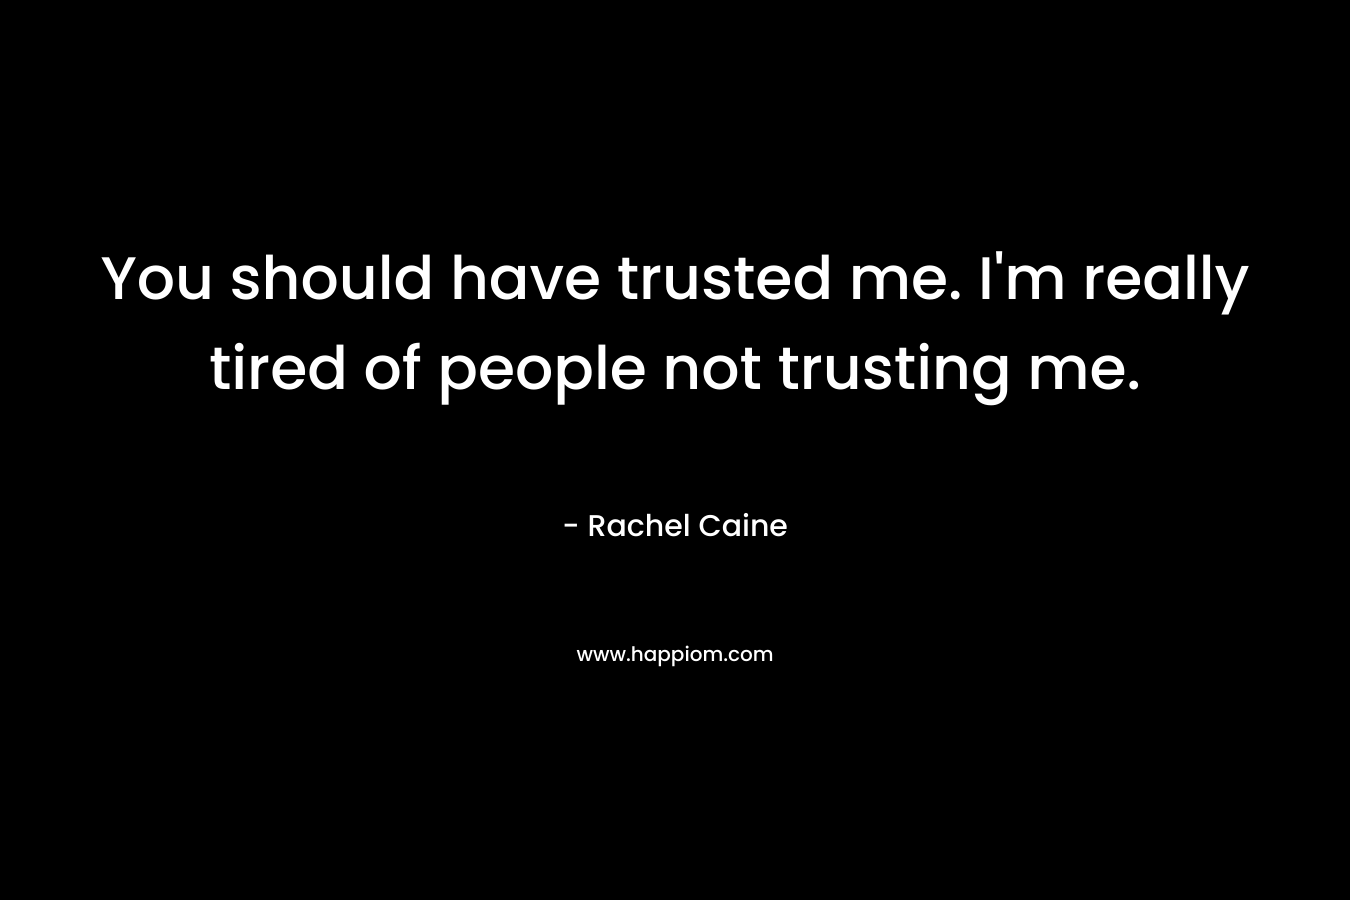 You should have trusted me. I’m really tired of people not trusting me. – Rachel Caine